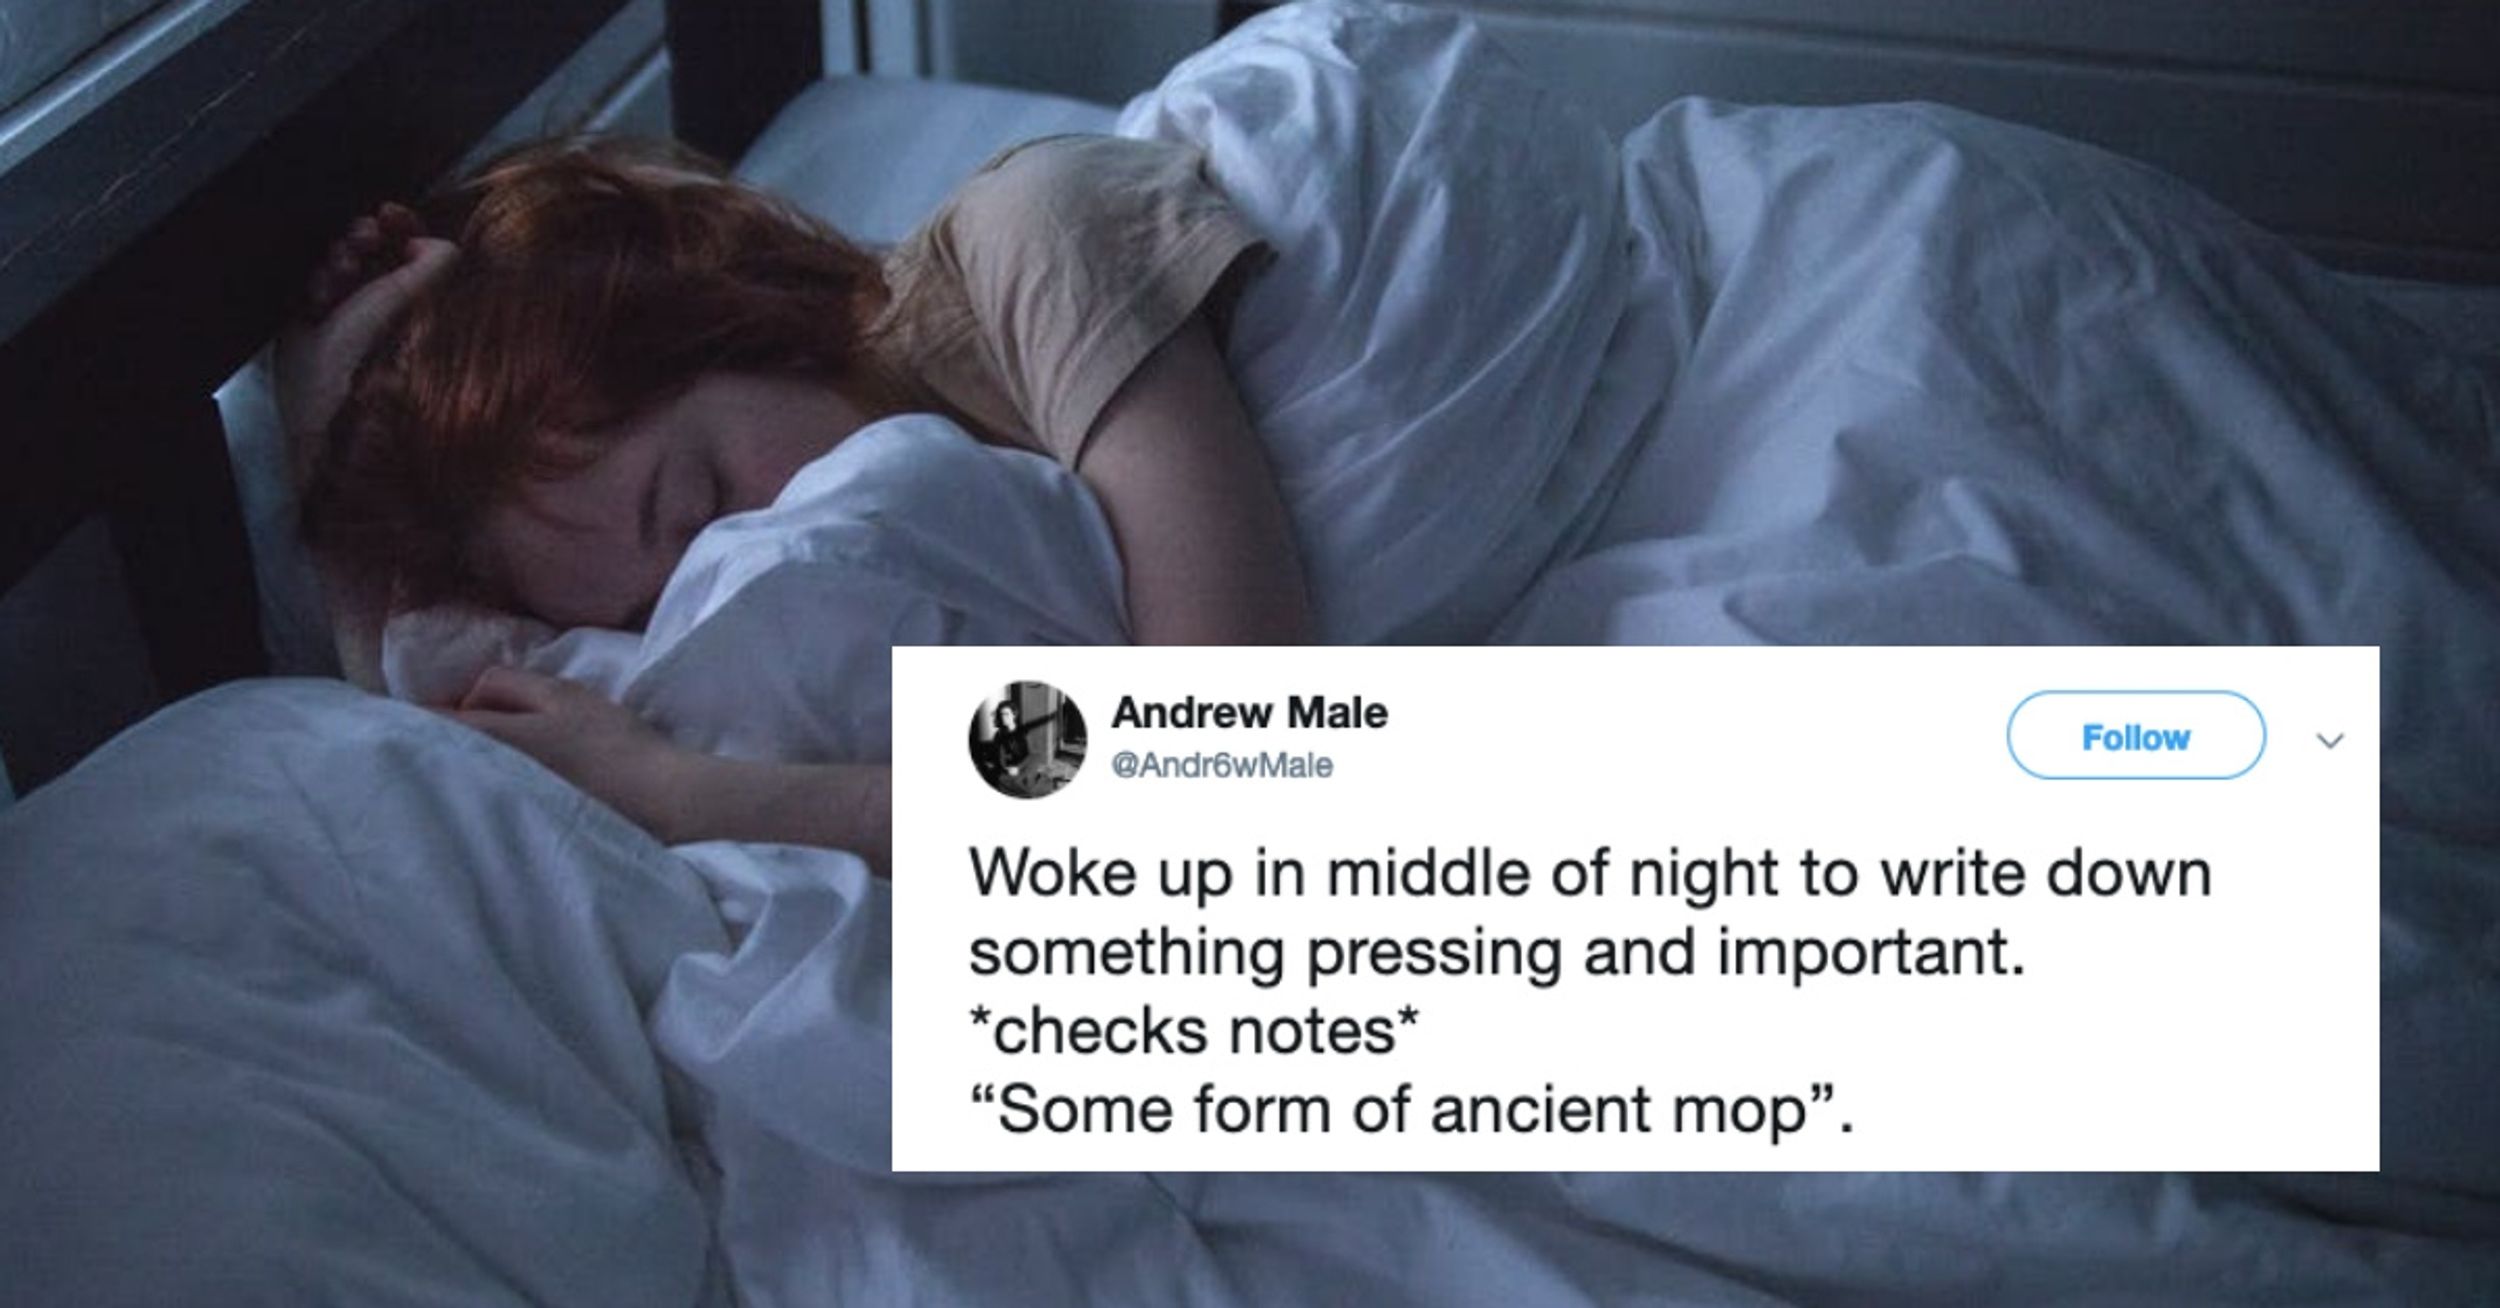 These 'Genius' Ideas From People's Dreams Are Hilariously Nonsensical In The Light Of Day